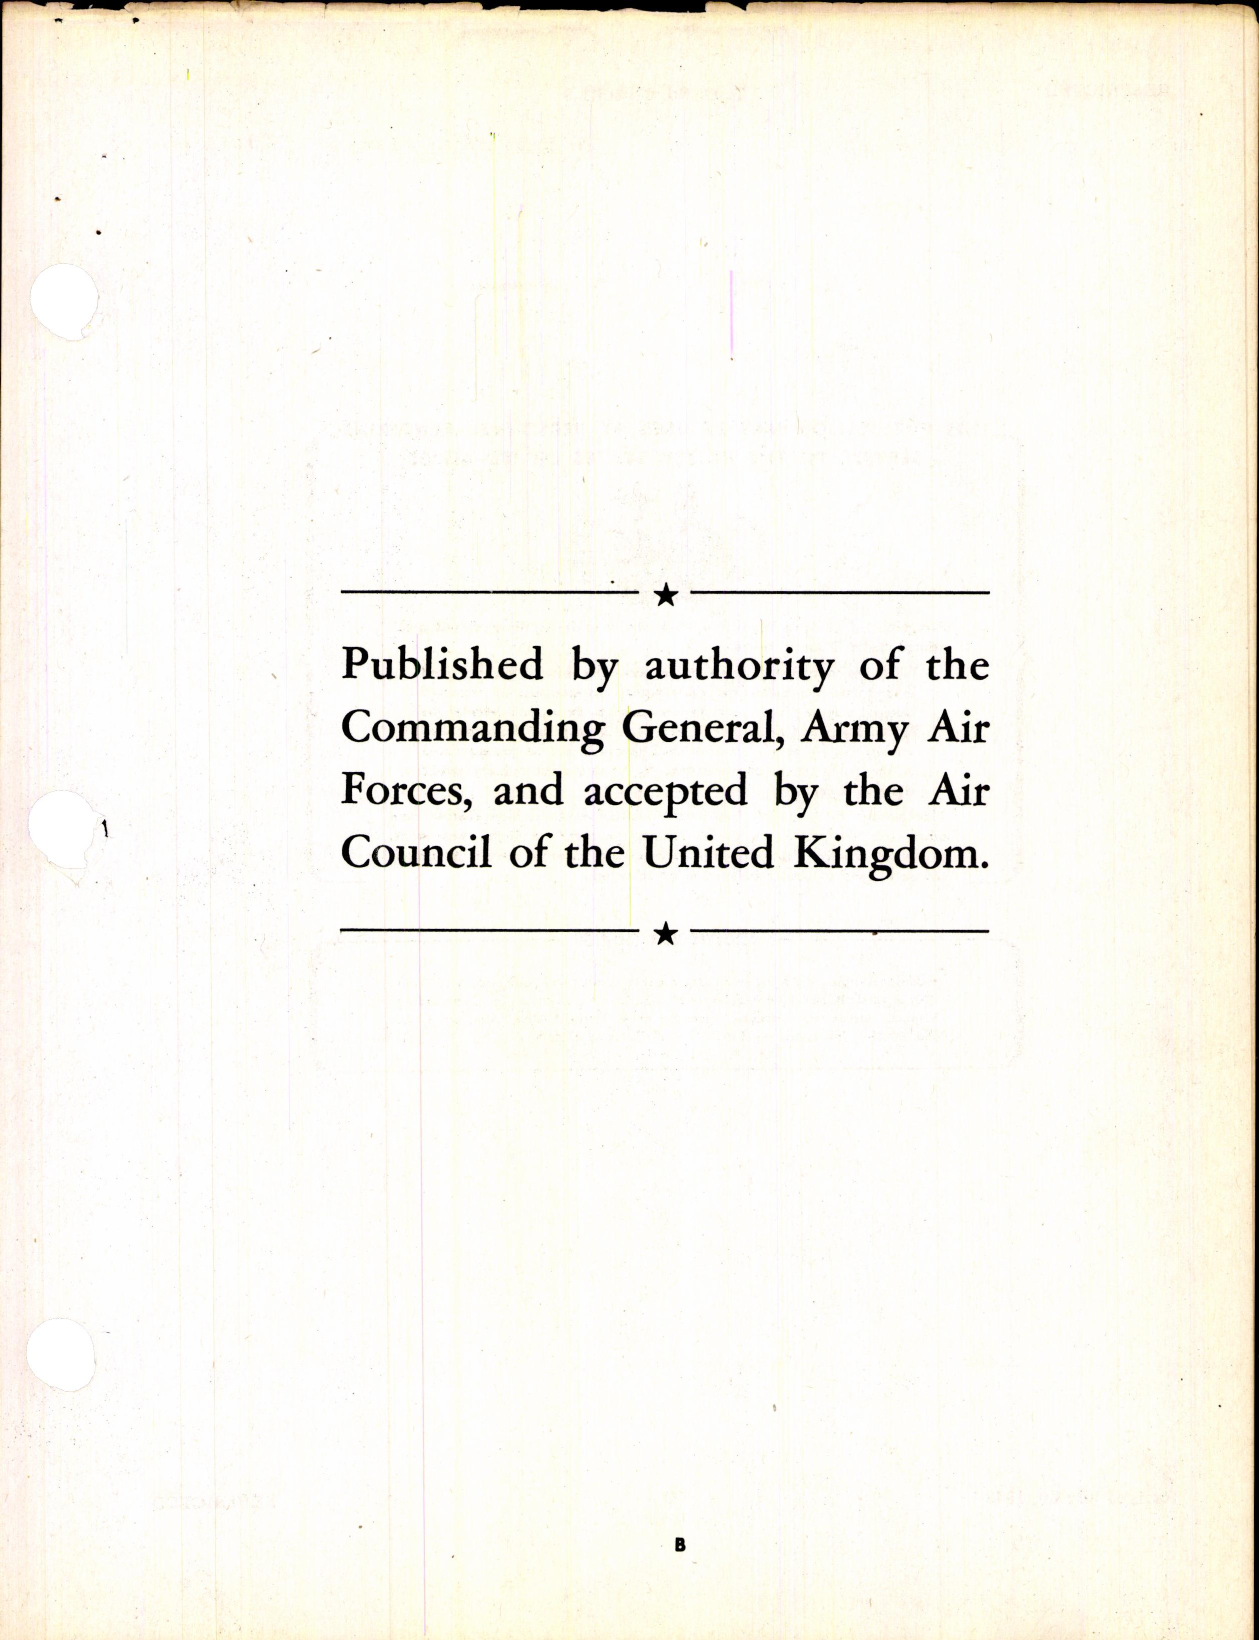 Sample page 3 from AirCorps Library document: Structural Repair Instructions for Army P-51